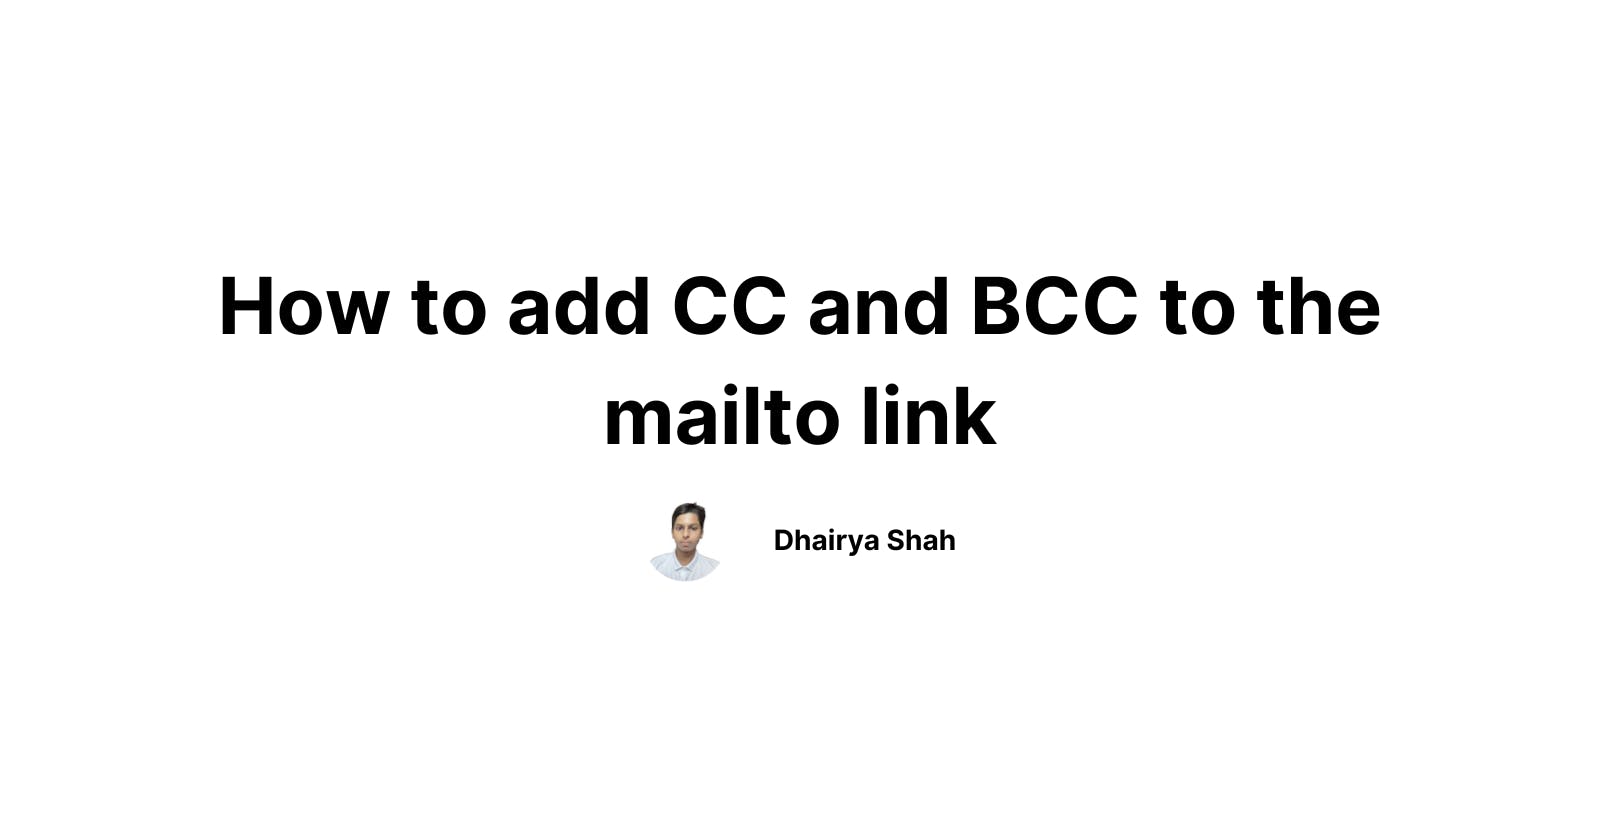 How to add CC and BCC to the mailto link?